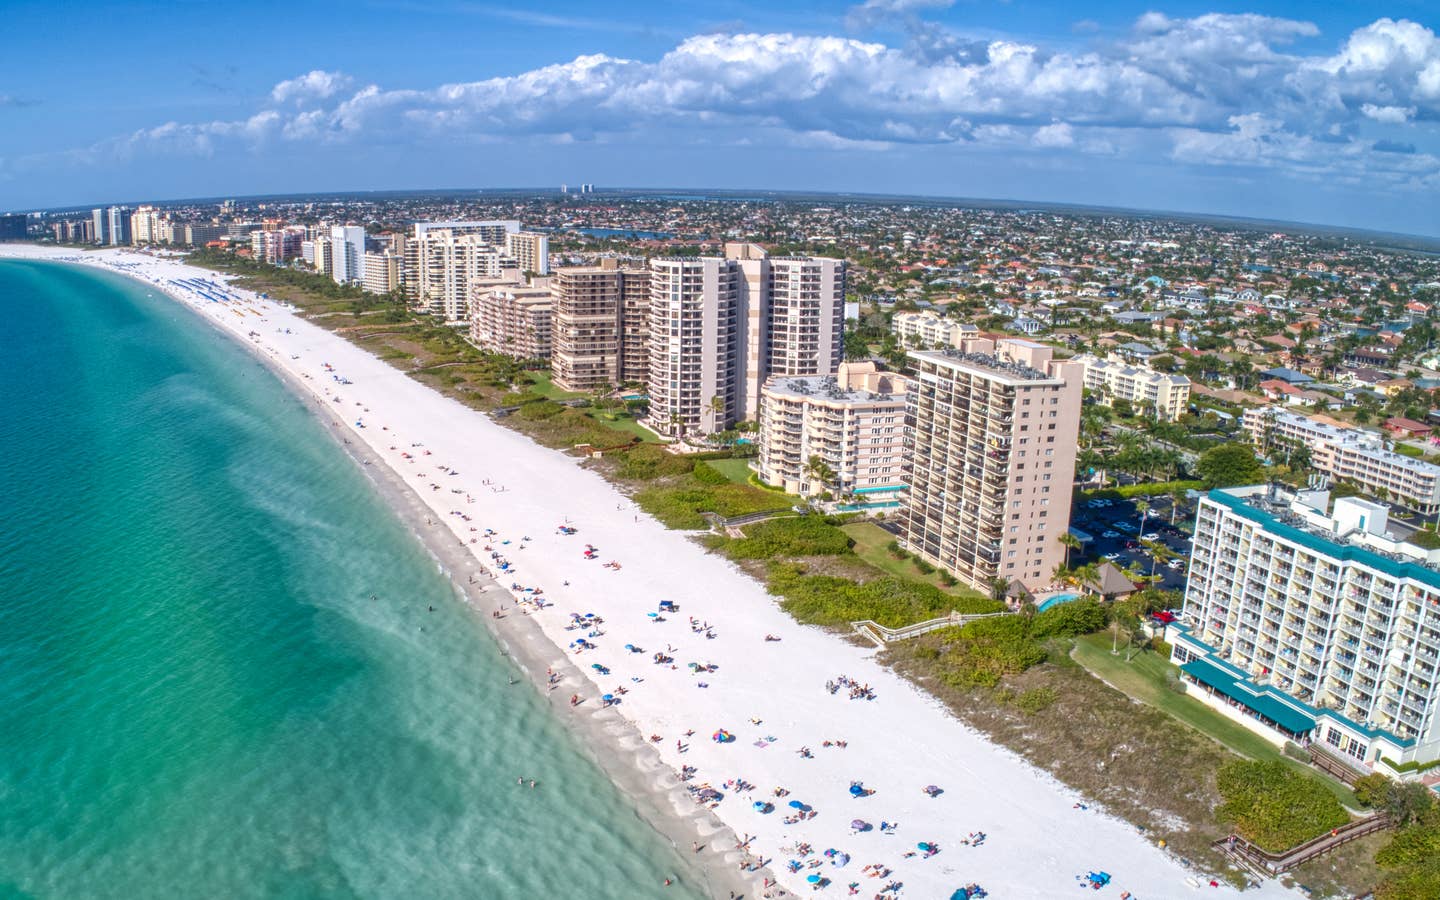 Aerial view of Marco Island, FL